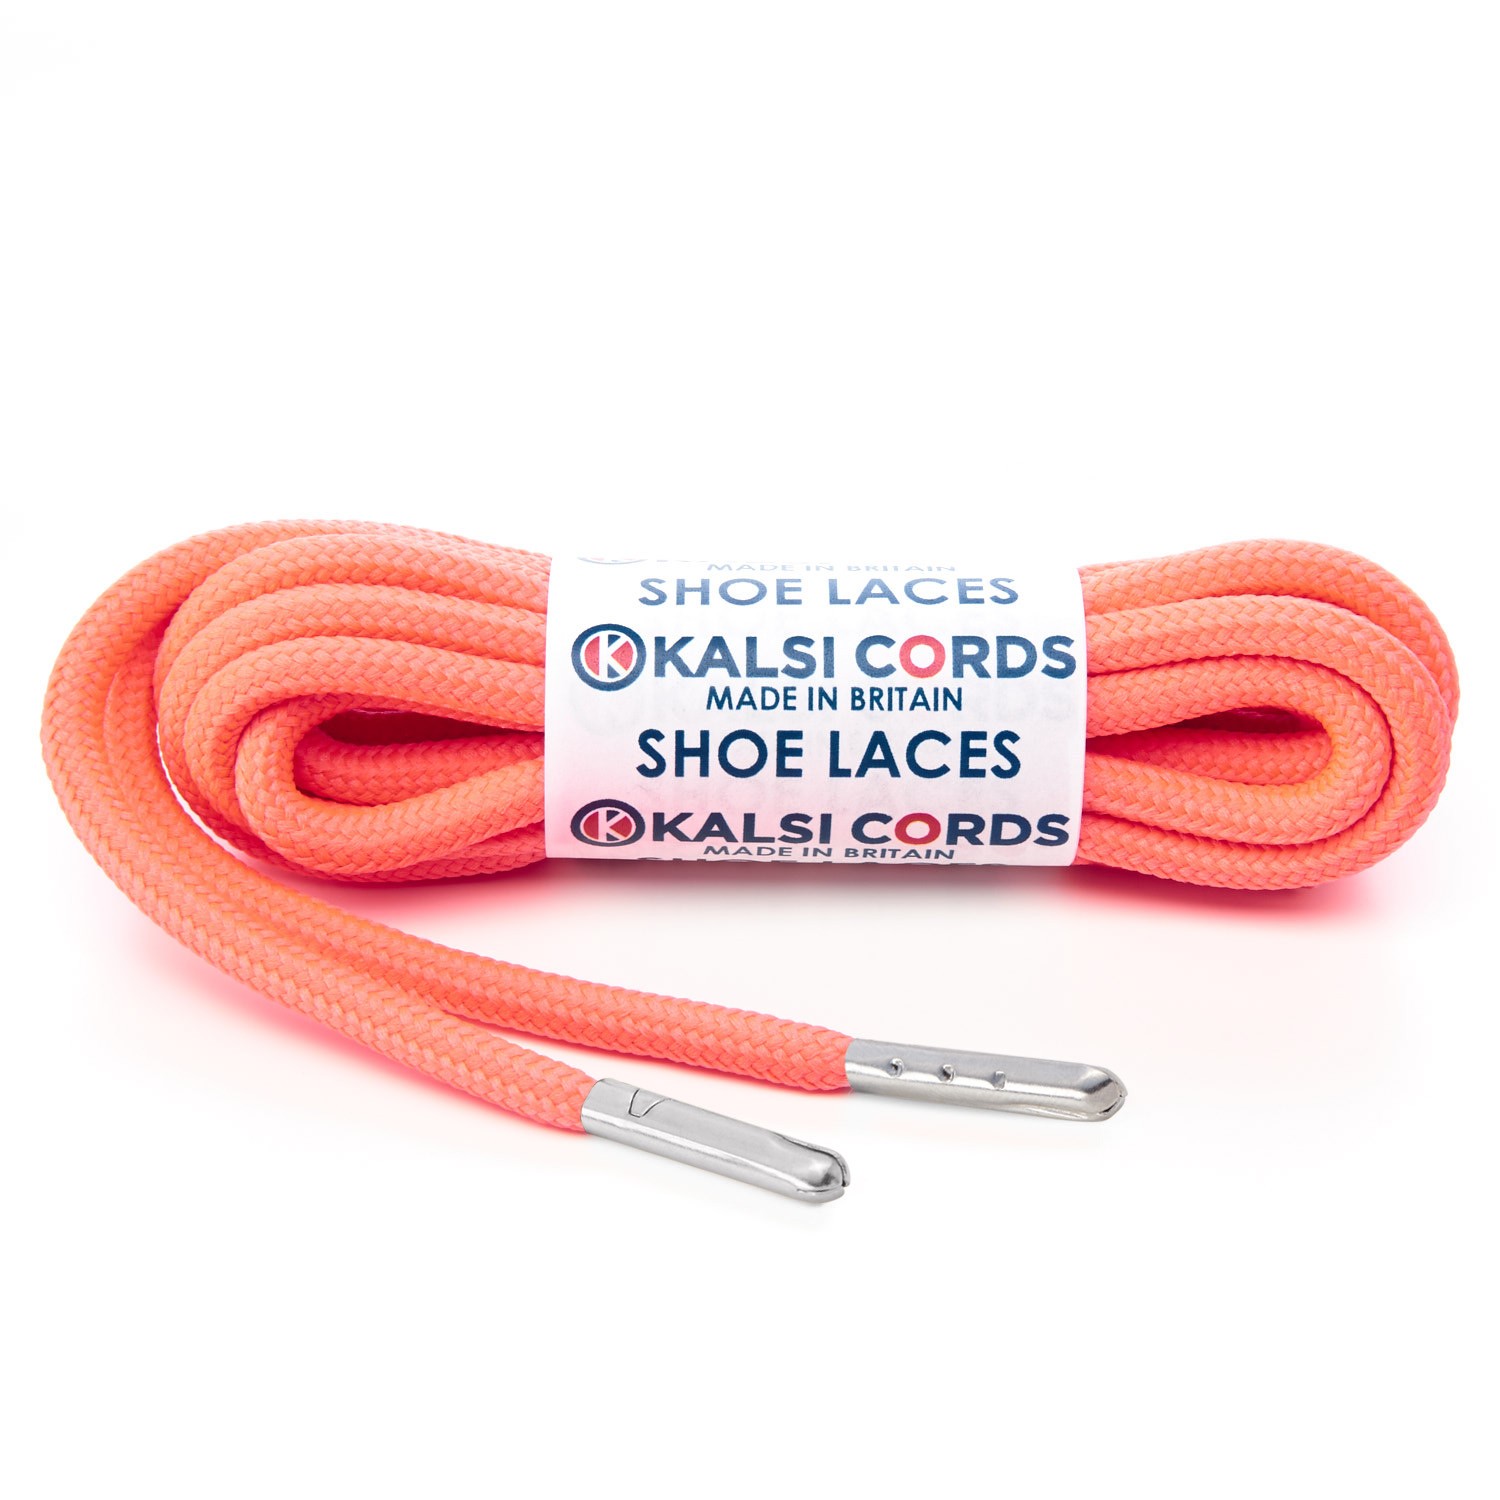 T621 5mm Round Polyester Shoe Laces Fluorescent Pink 1 Silver Metal Tip Kalsi Cords